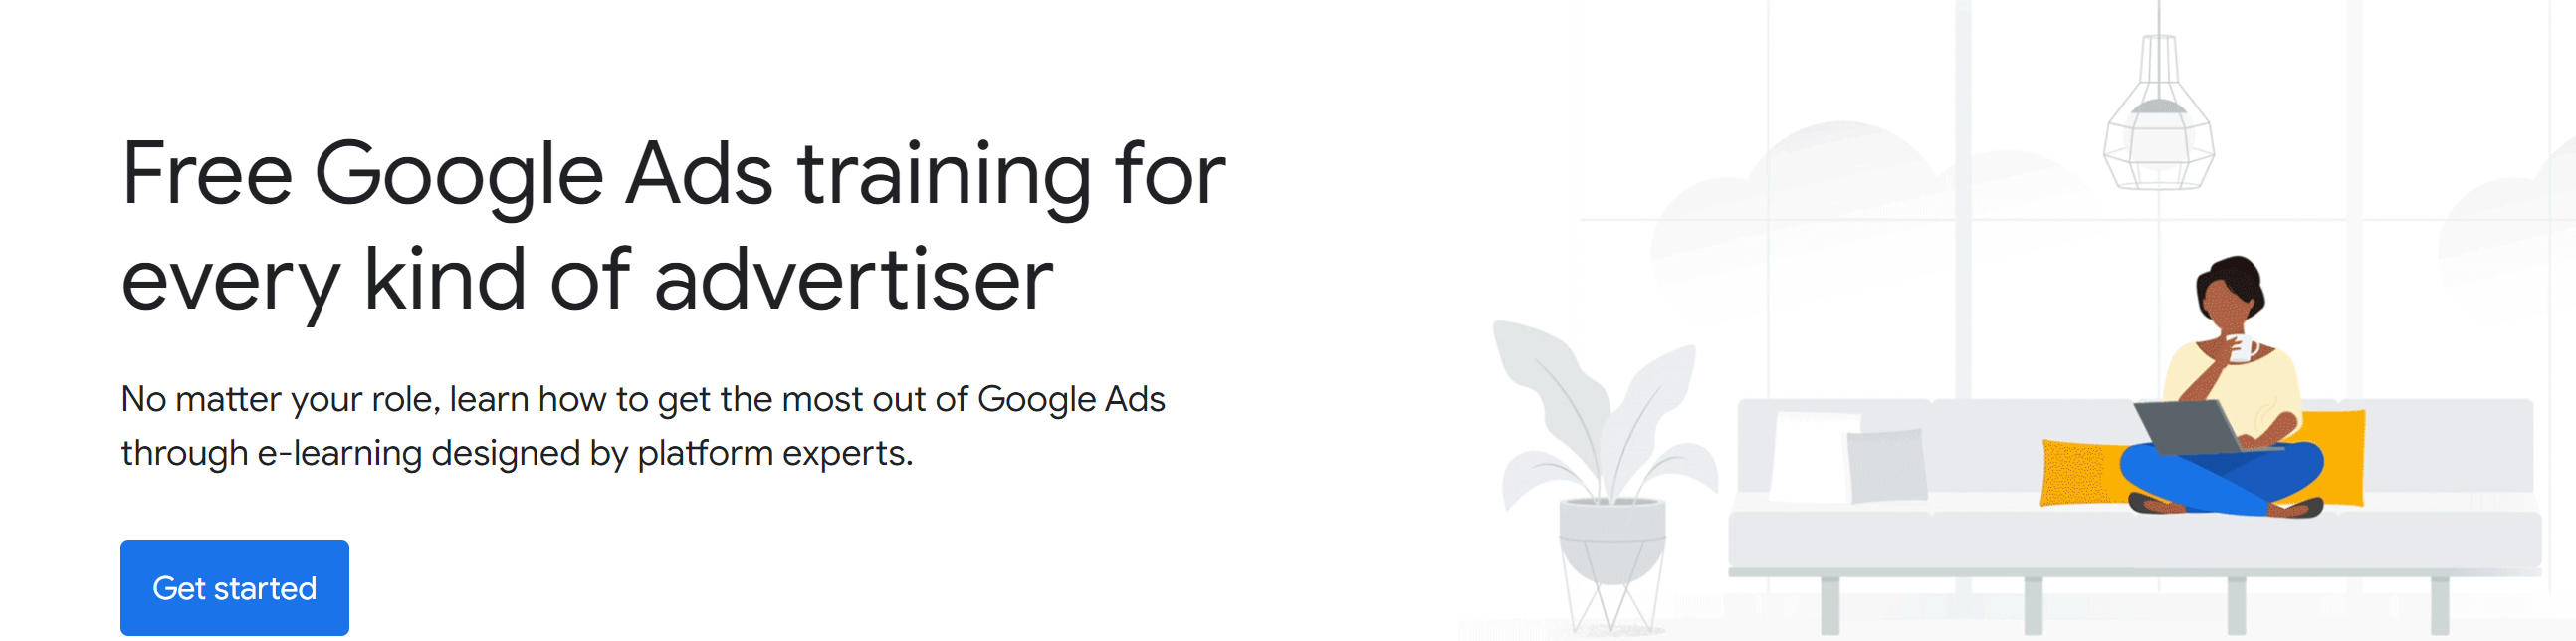 Free Google Ads training for every kind of advertiser